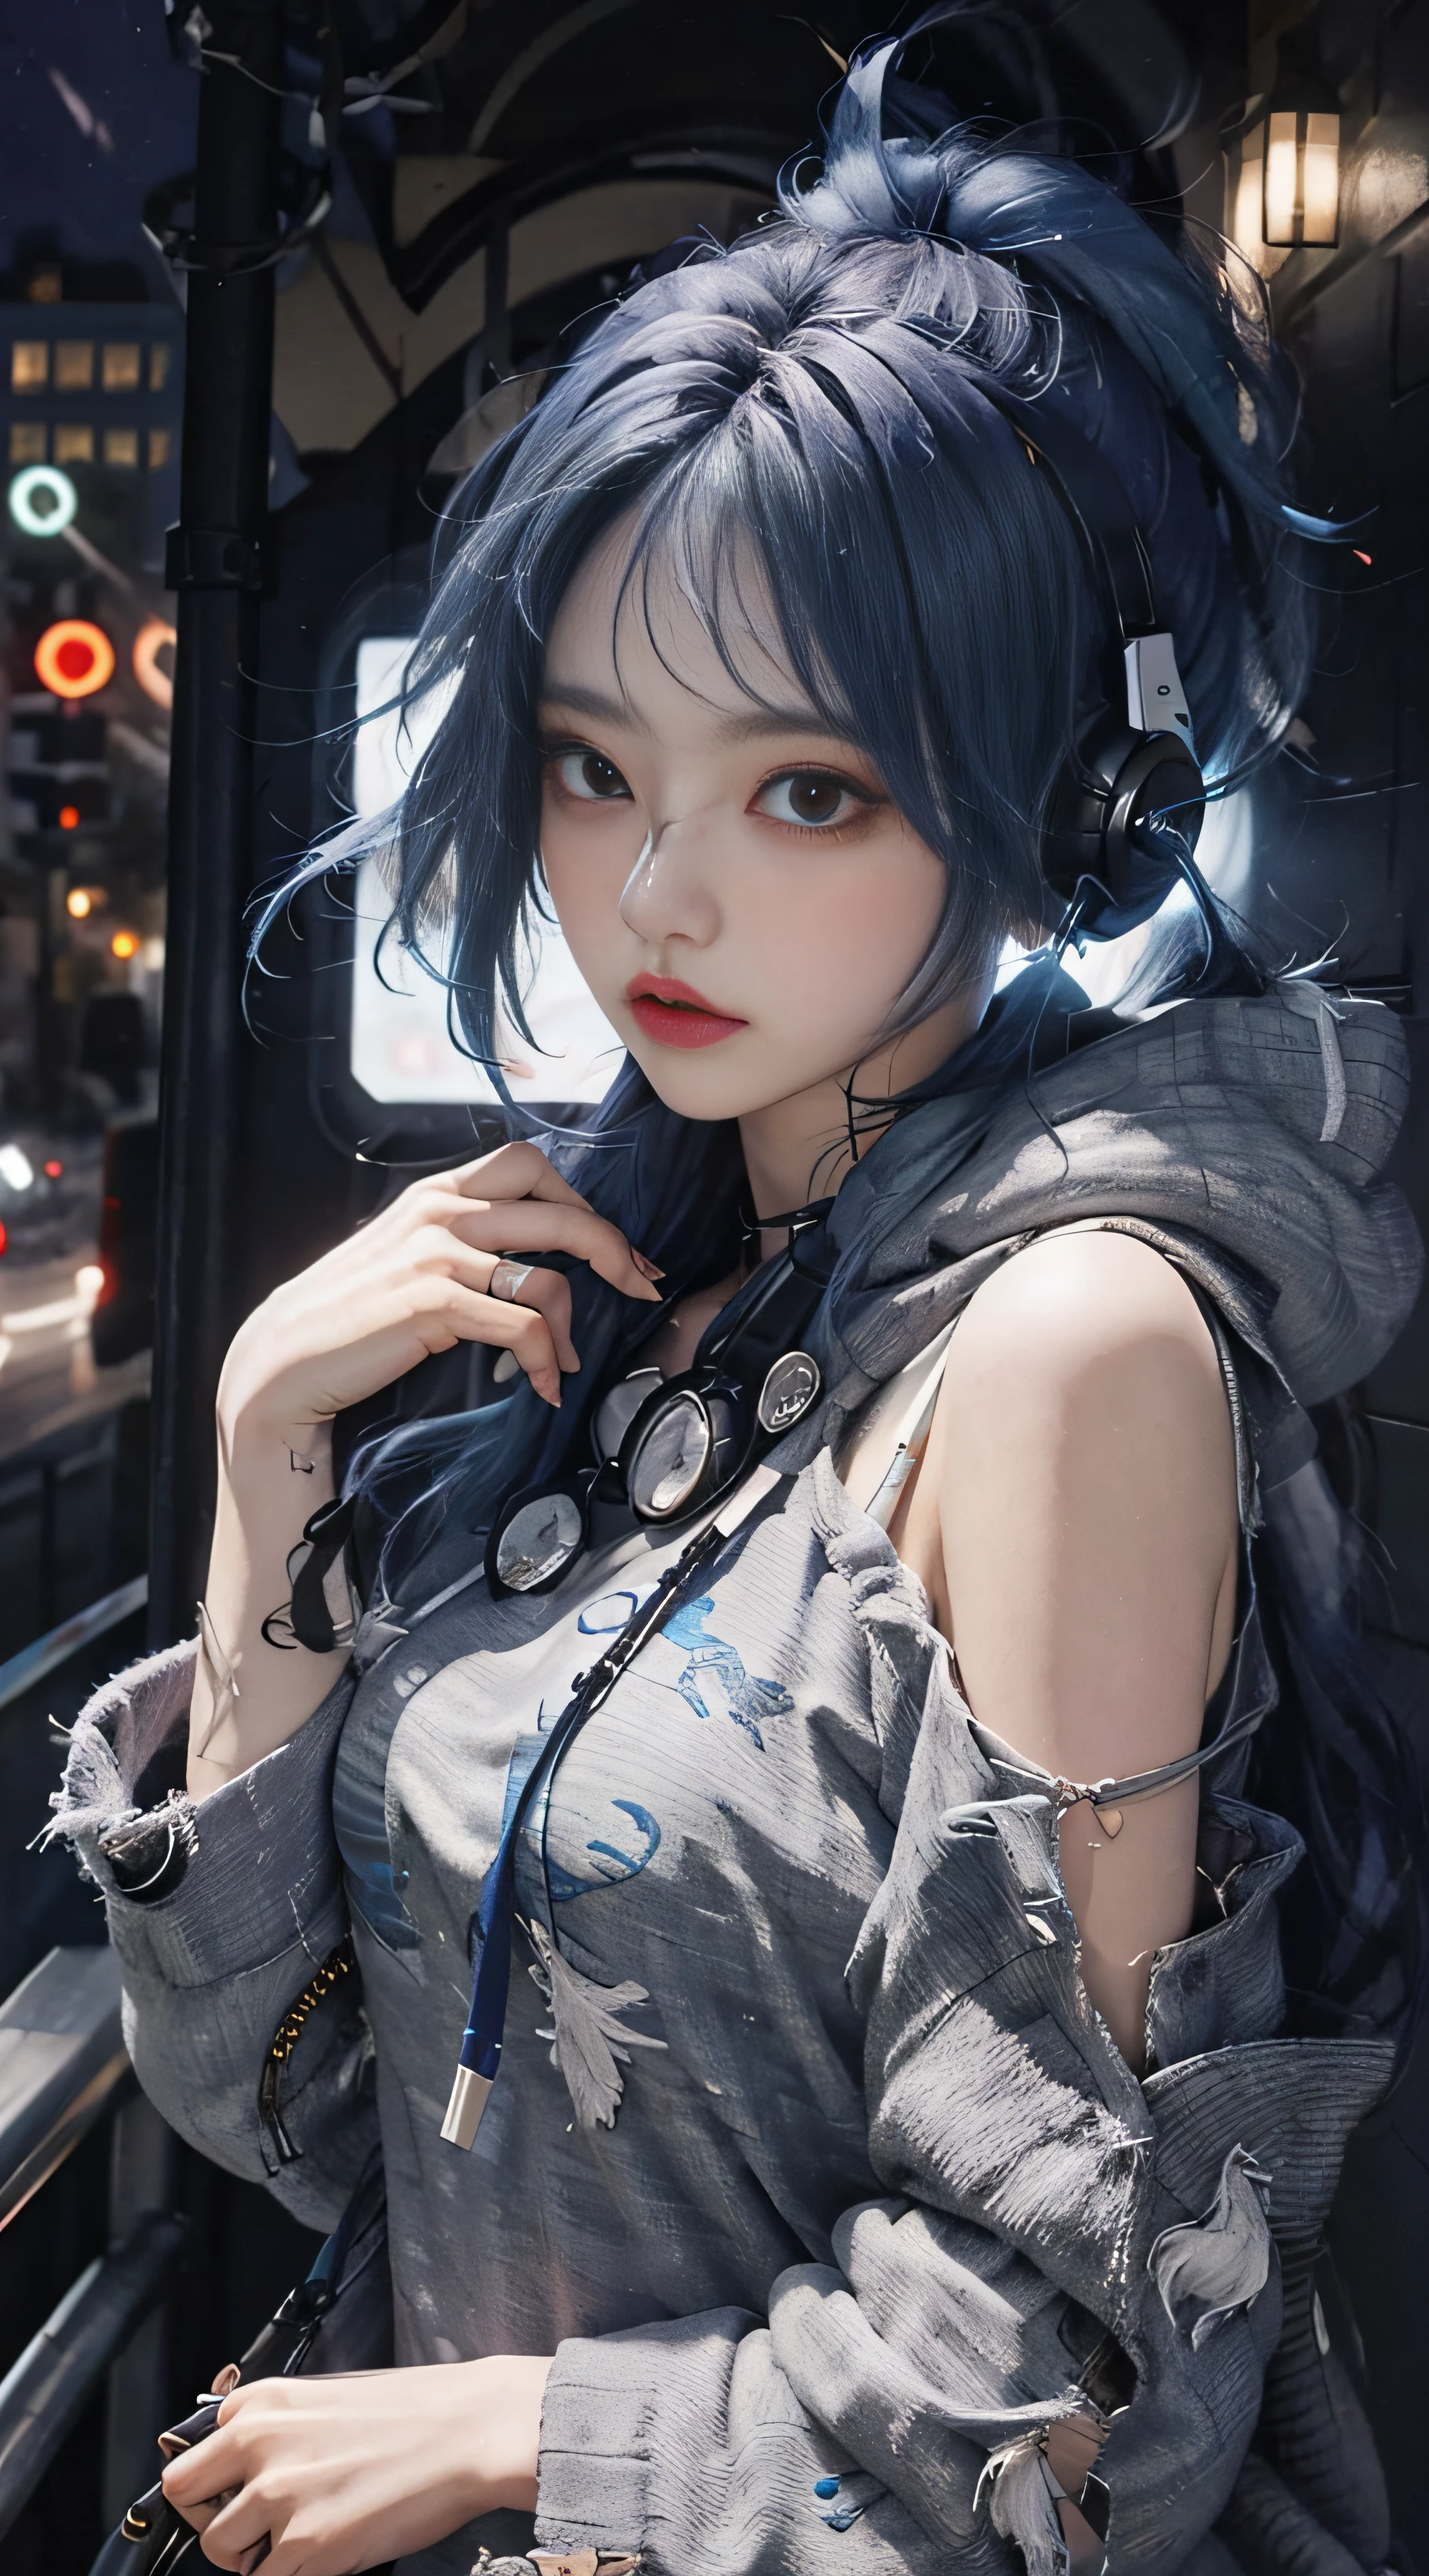 1 girl, hoodie, blue hair, extra long hair, off-the-shoulder, feather hair ornament, headphones around the neck, city, night, outdoors